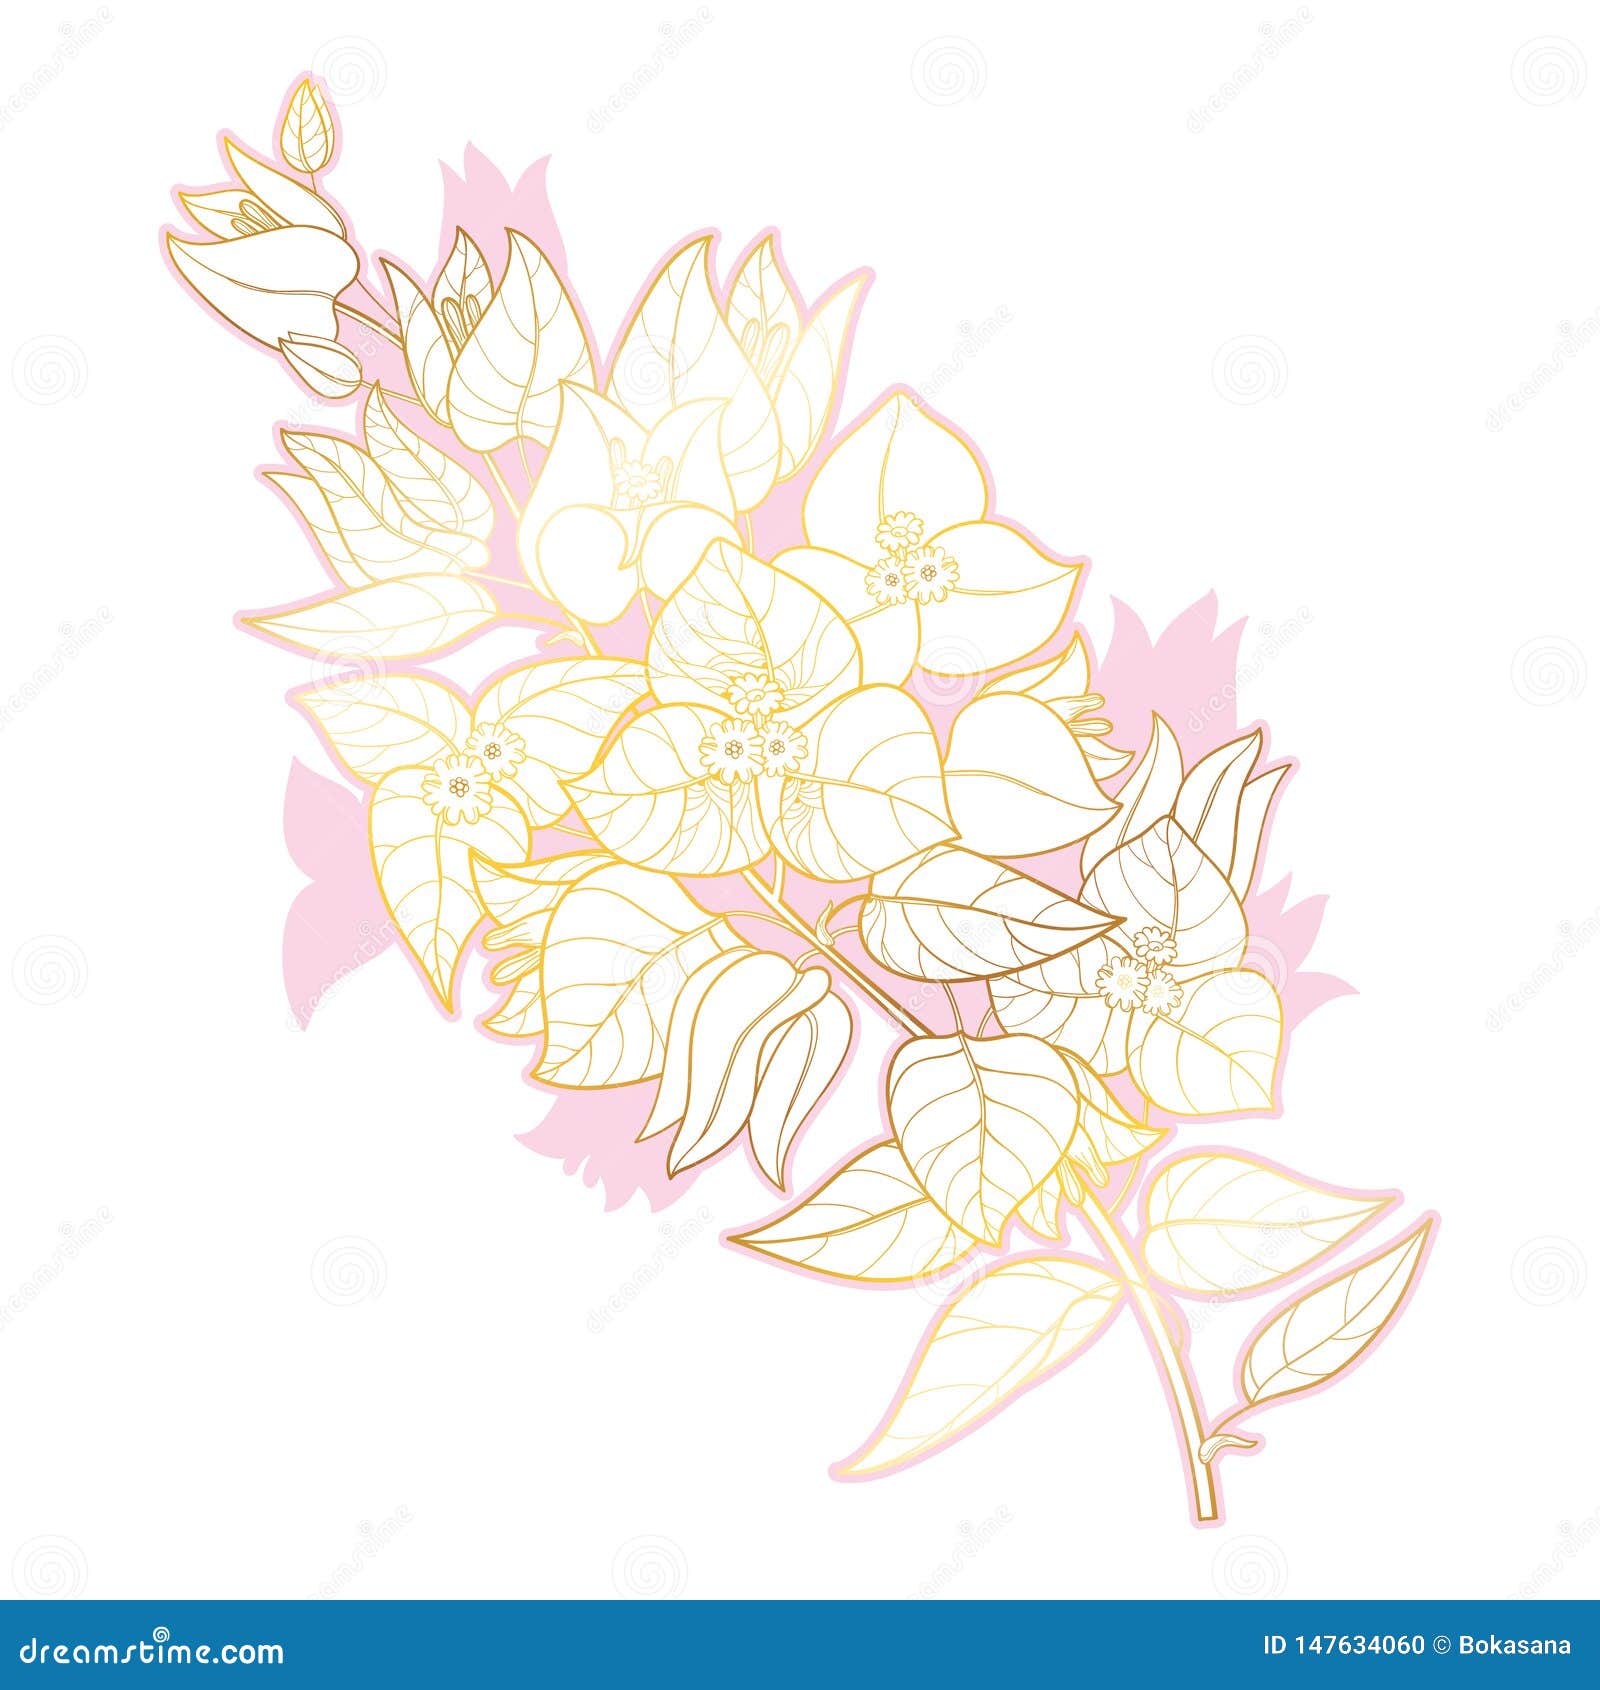  outline bougainvillea or buganvilla flower bunch with bud and leaf in gold and pink  on white background.